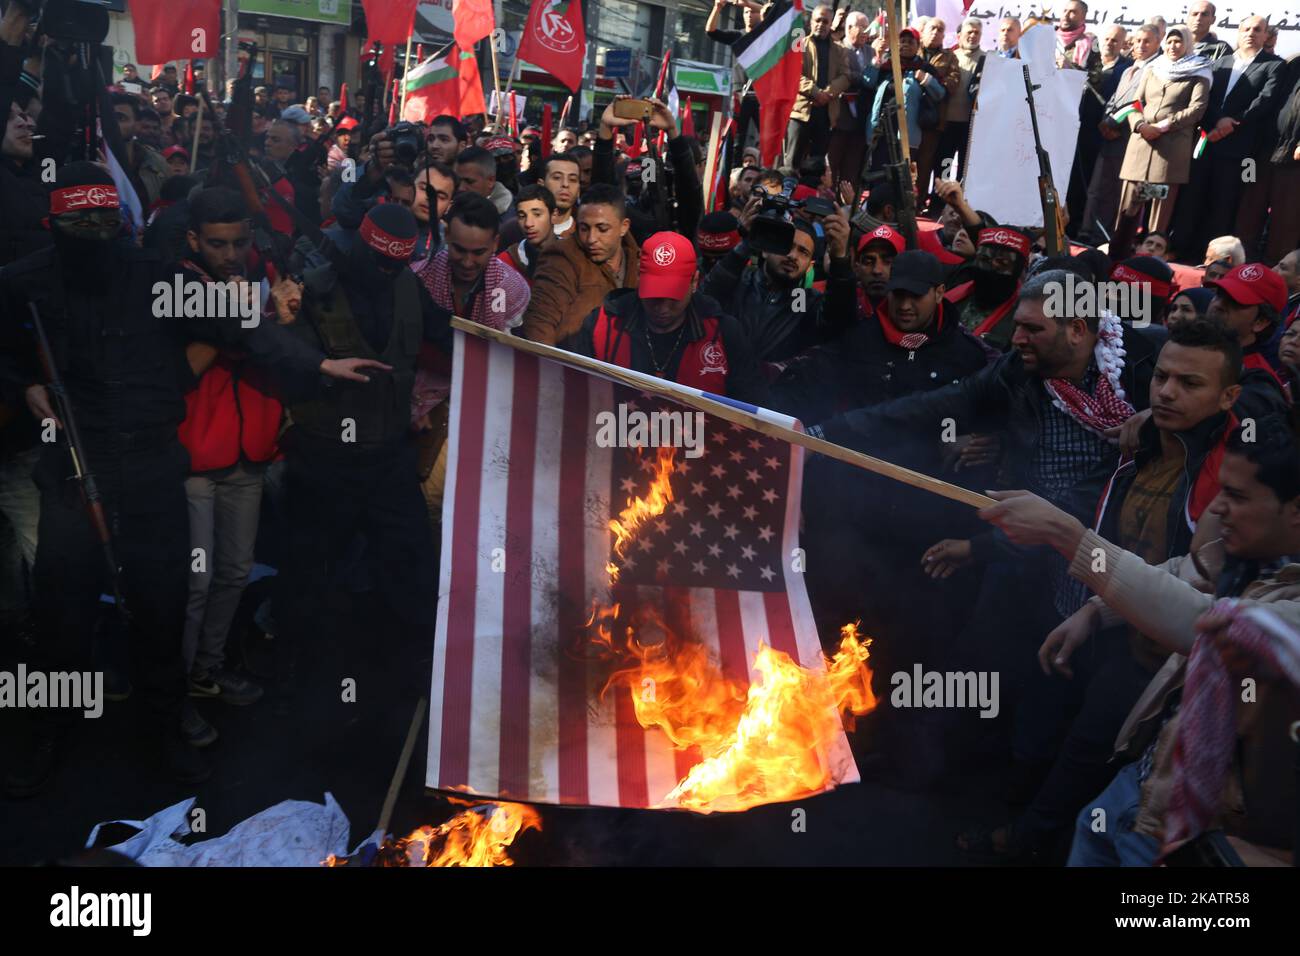 Palestinian militants of the Popular Front for the Liberation of Palestine (PFLP) burn representations of an Israeli flag and a U.S. flag during a protest against Trump's decision to recognize Jerusalem as the capital of Israel, in Gaza City December 9, 2017. (Photo by Majdi Fathi/NurPhoto) Stock Photo